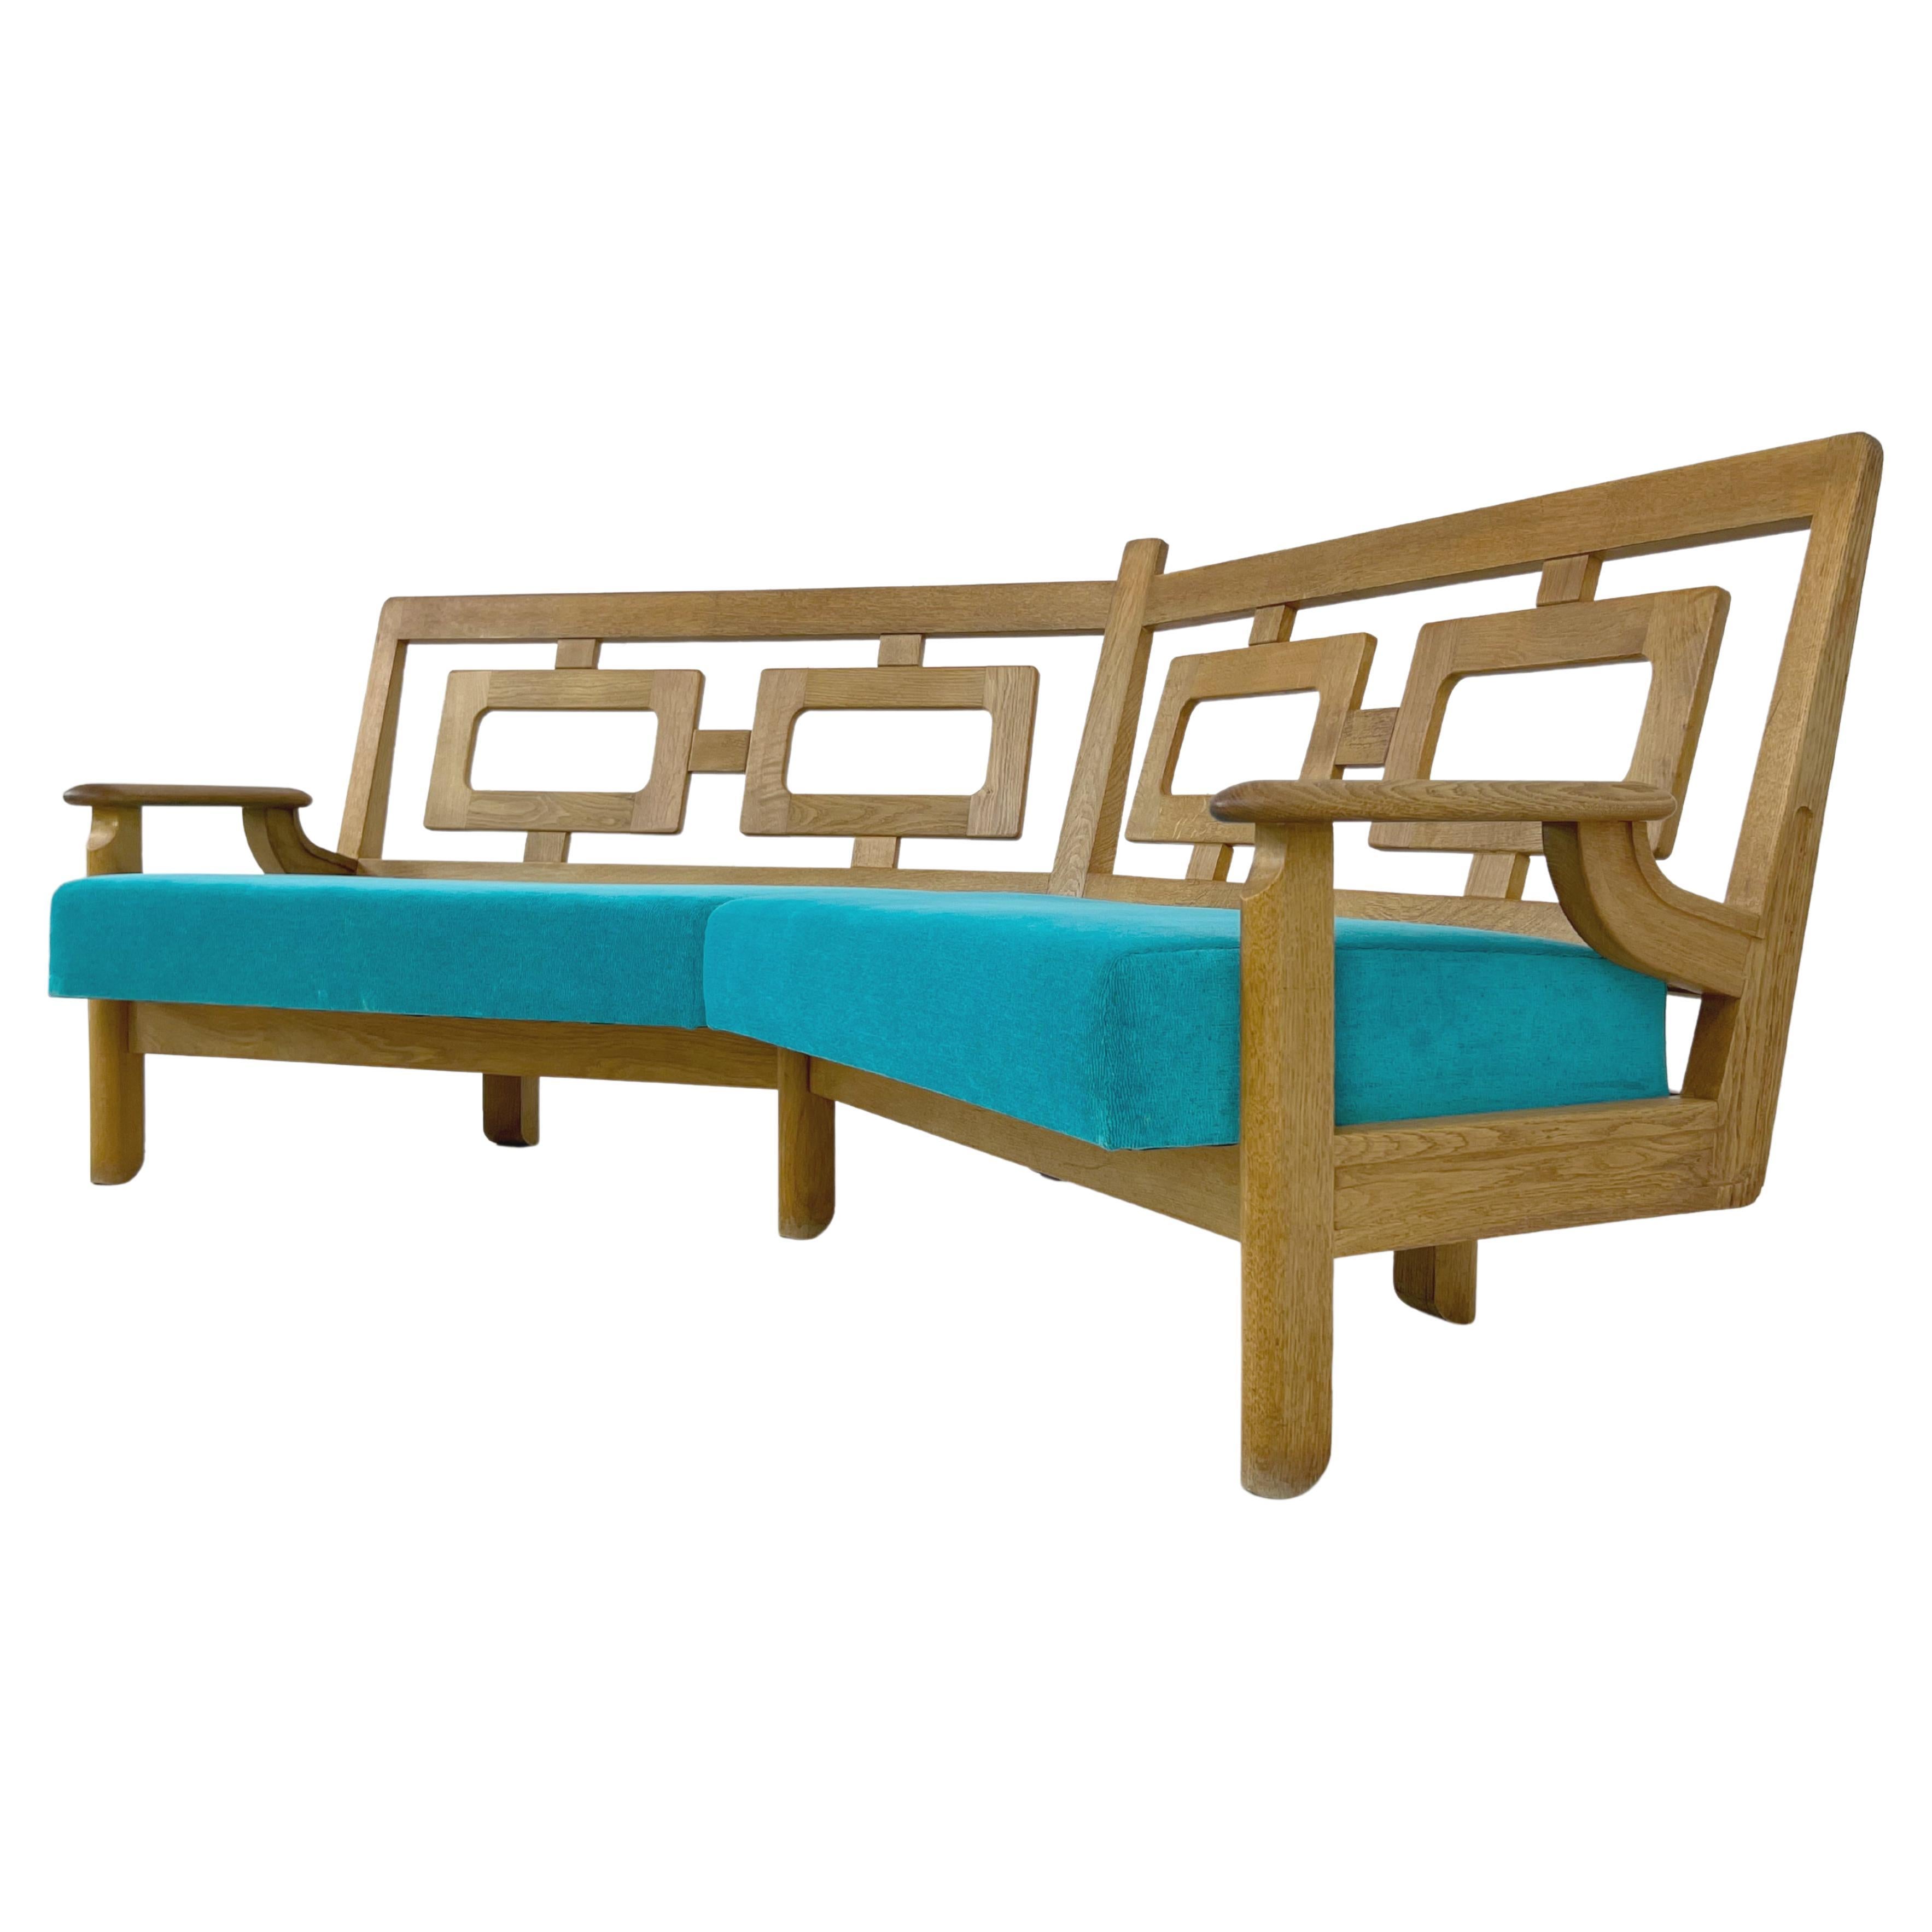 1950s - 1960s Guillerme et Chambron French Design Oak Wood Angular Curved Sofa For Sale 8